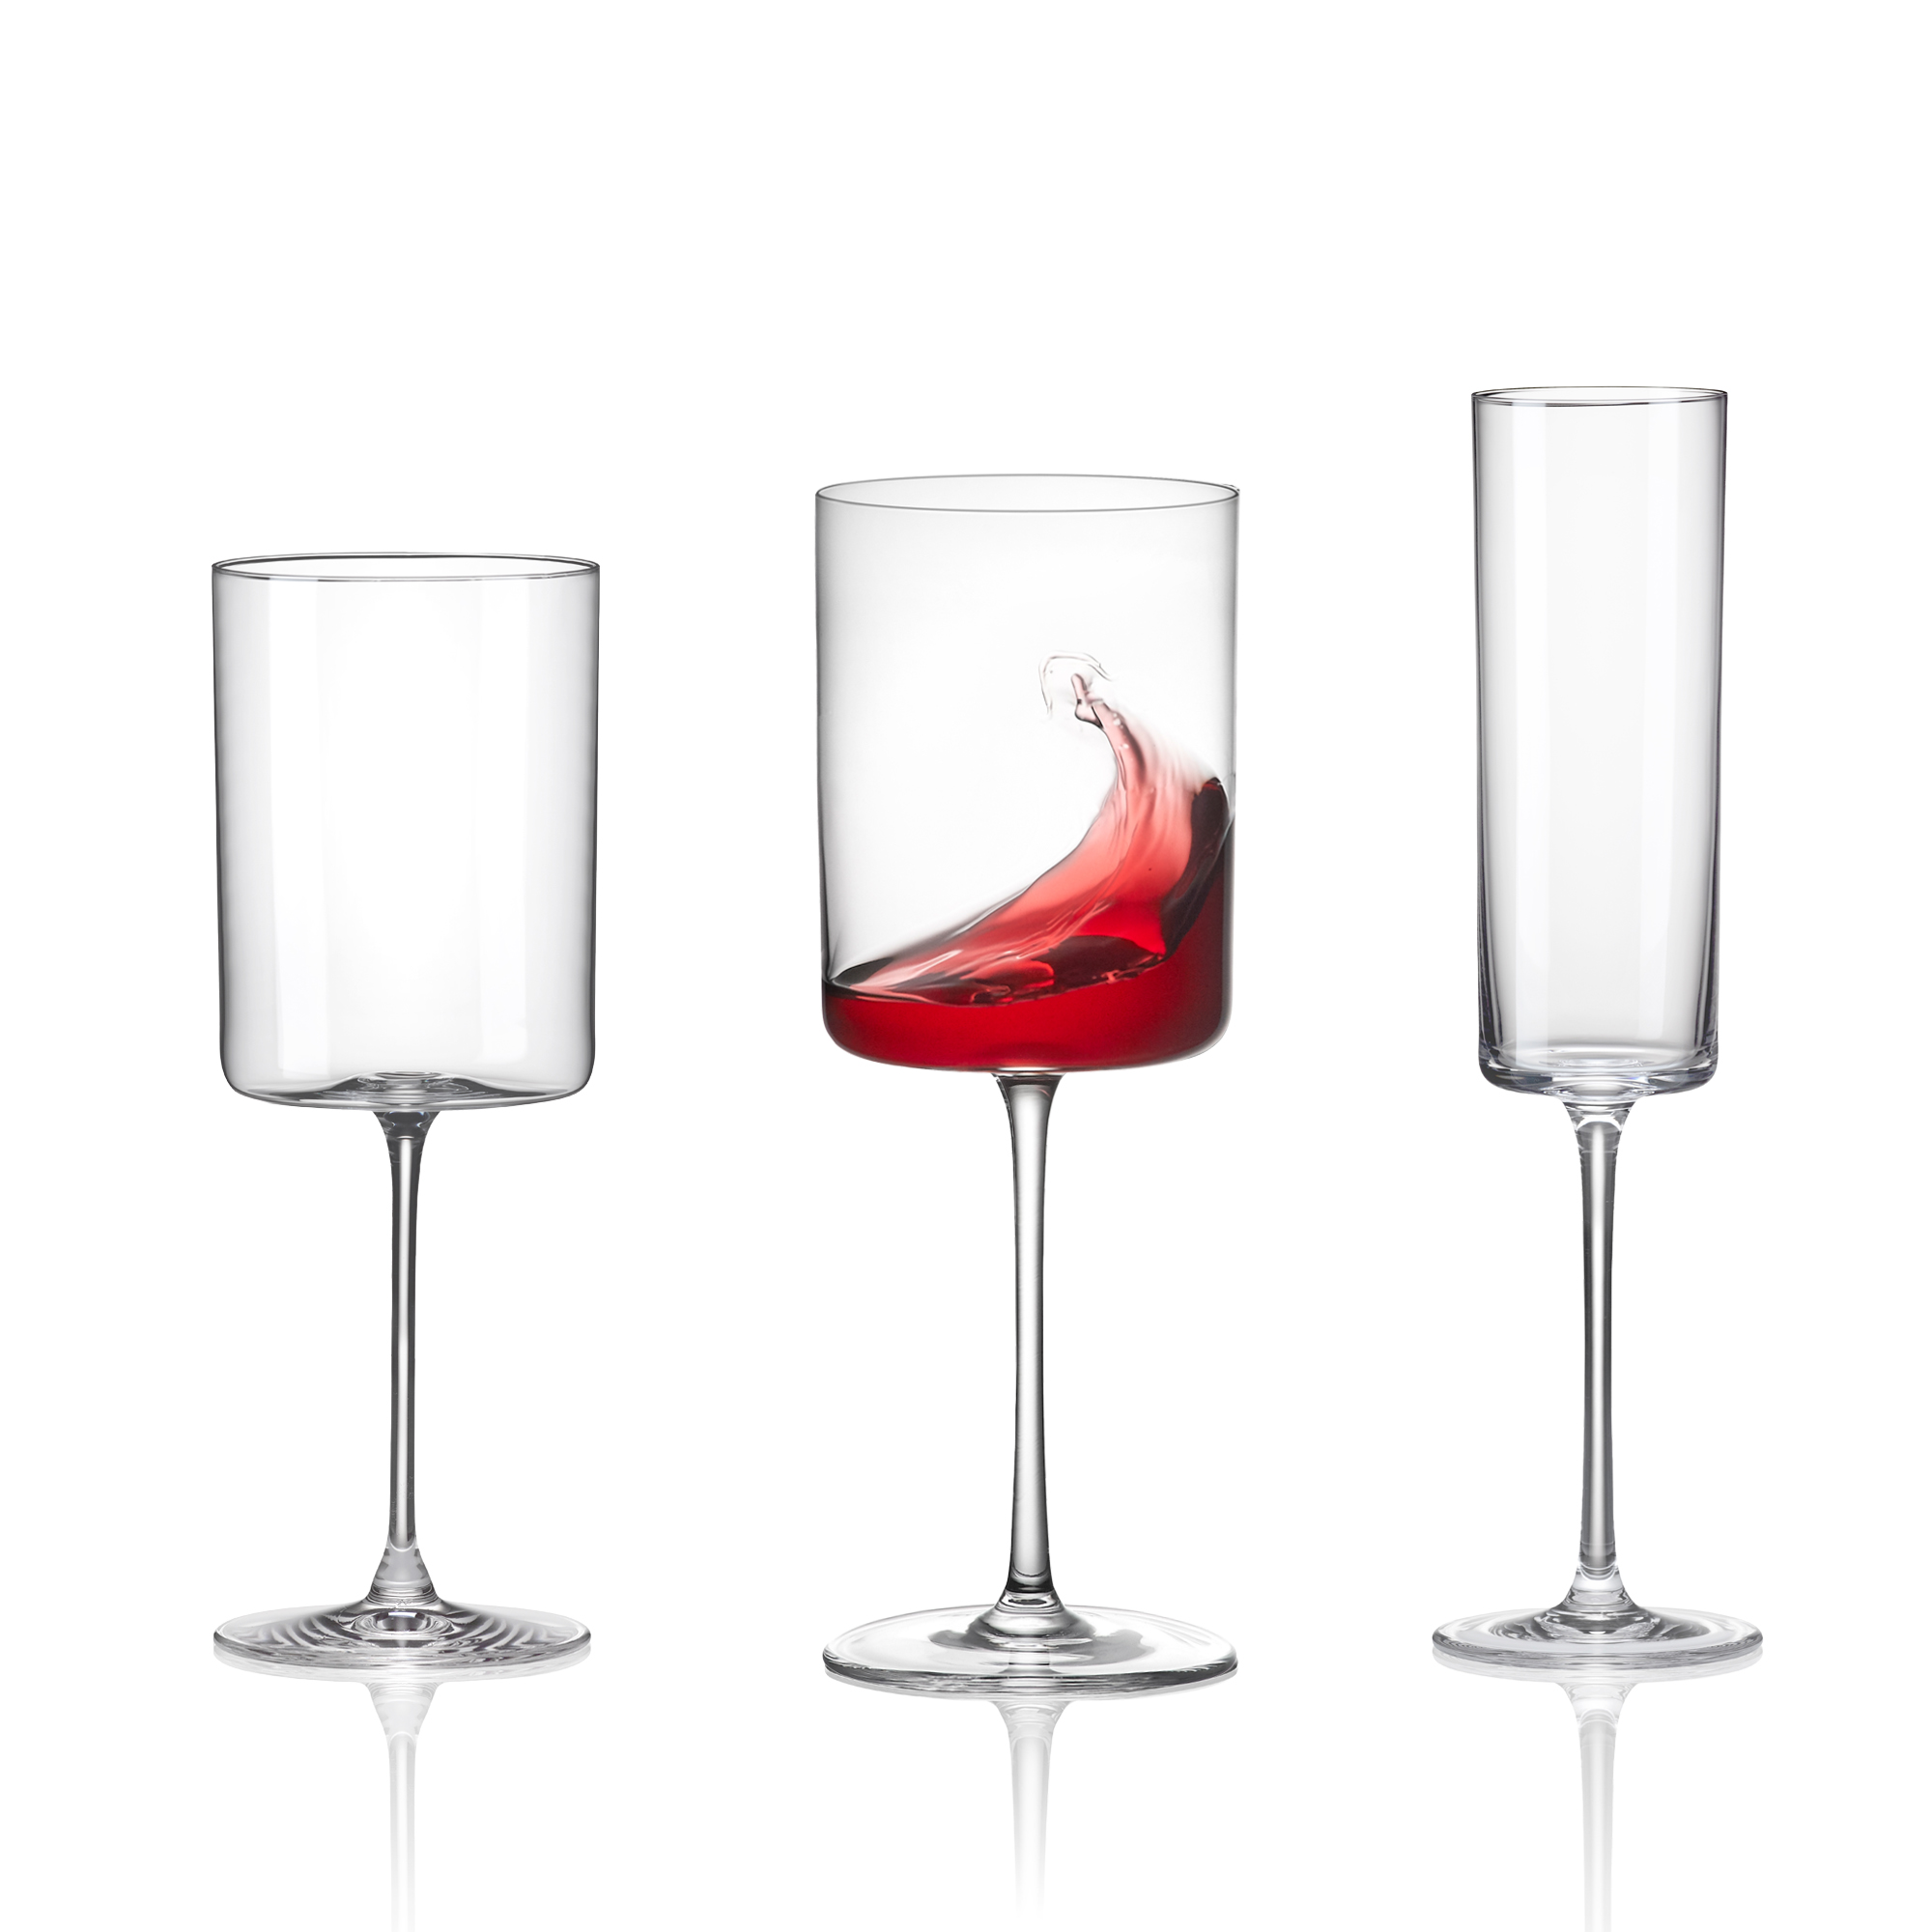 Modern Wine Glasses (Set of 4) 14 Ounces - Large Capacity, Tall Wine Glass